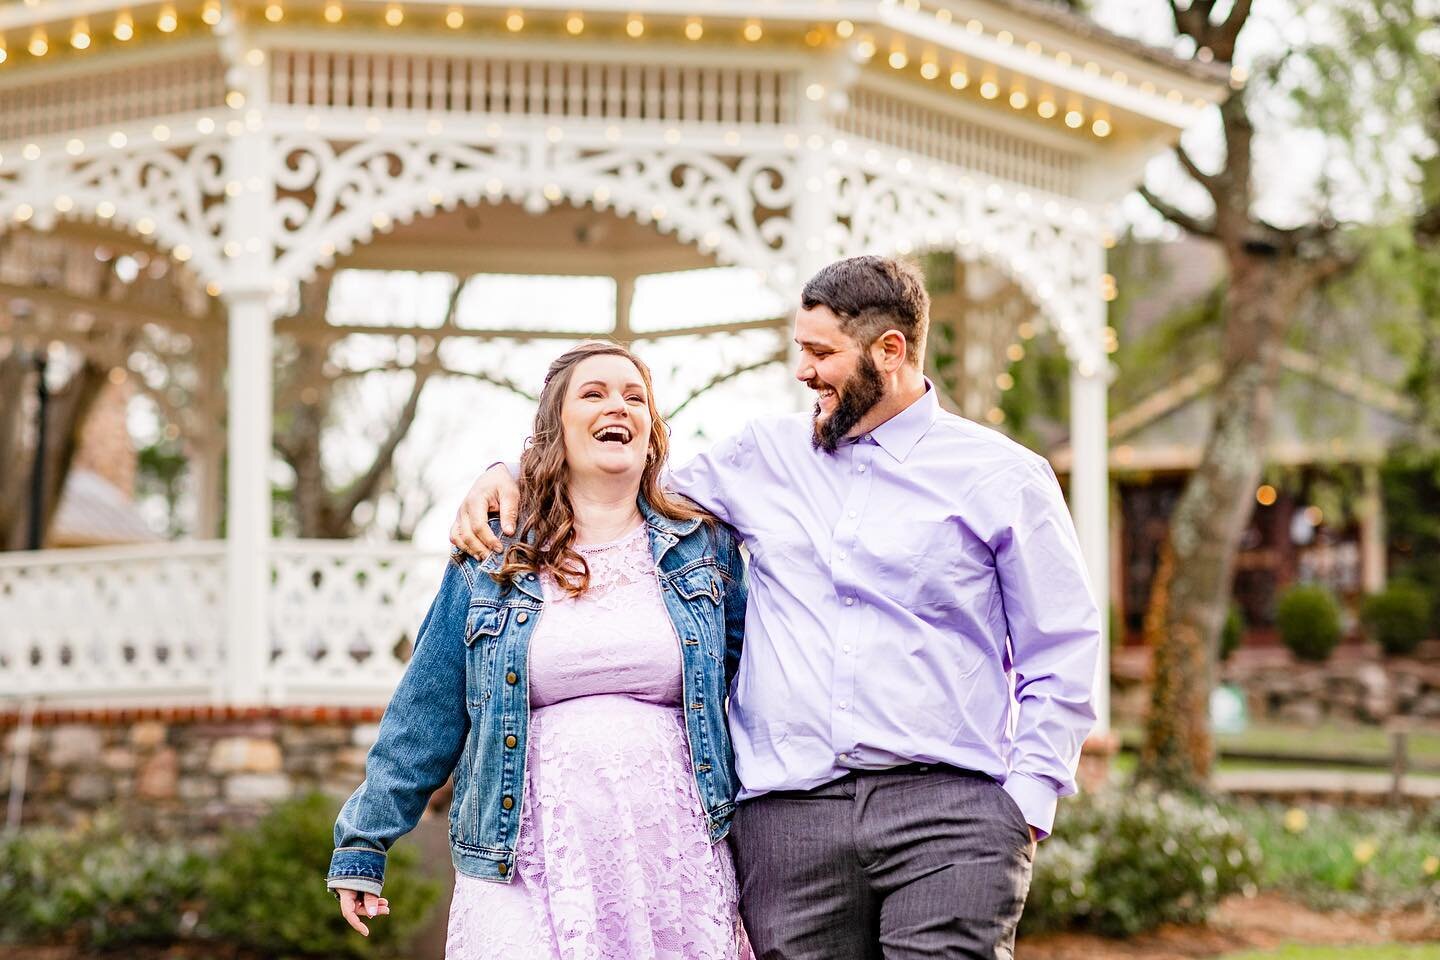 This chilly weather has me at the edge of my seat waiting for all of the spring time engagement sessions! 🌷
.
.
.
.
.
#engagementsessions #WeddingPhotographer #NJWeddingPhotographer #PAengagementsession #Peddler&rsquo;sVillage #Peddler&rsquo;sVillag